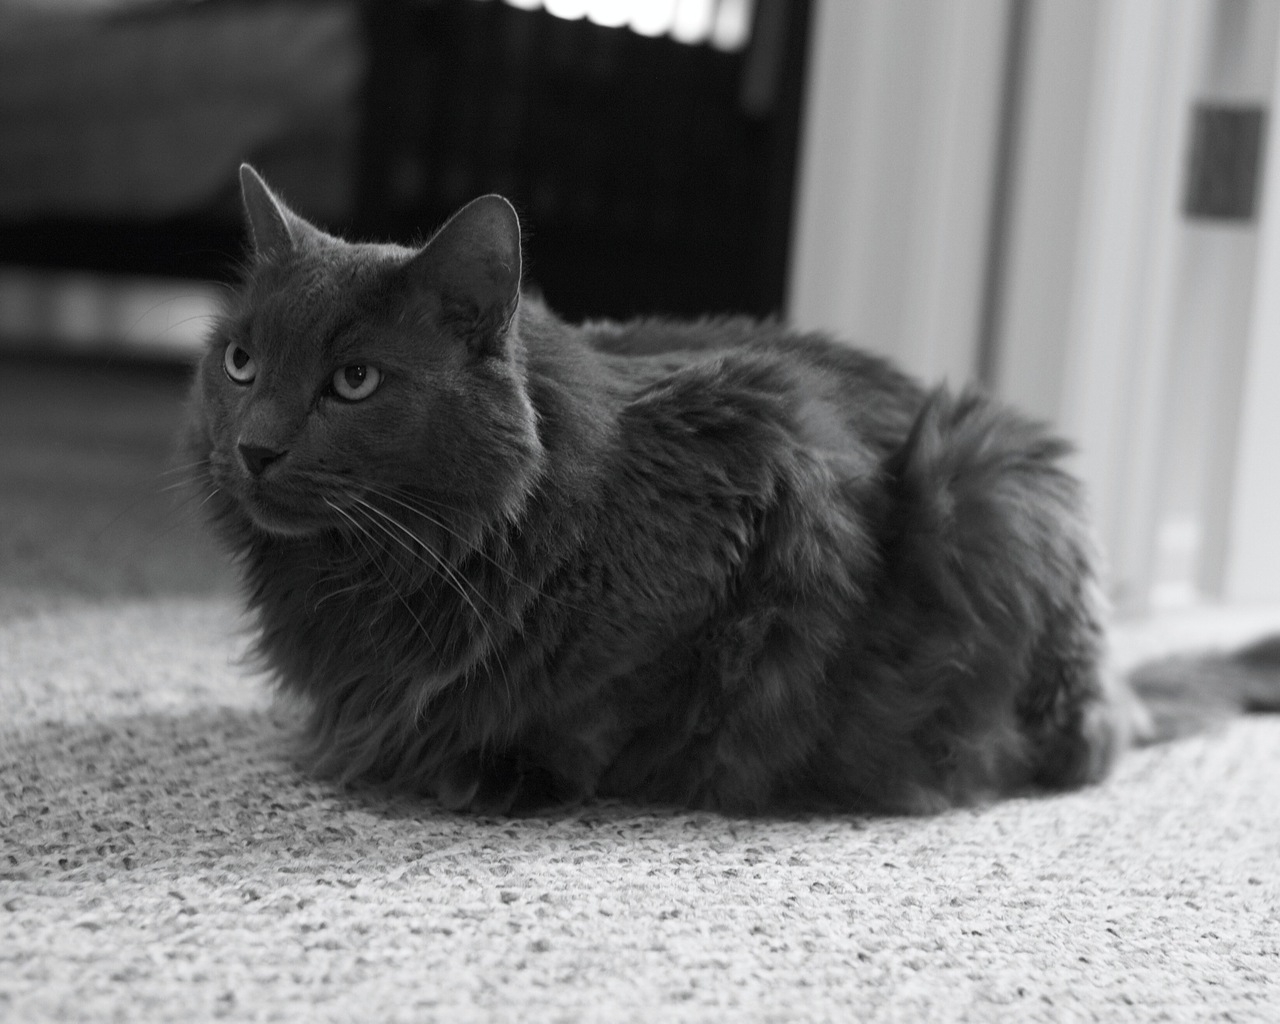 Monochrome Nebelung Cat for 1280 x 1024 resolution